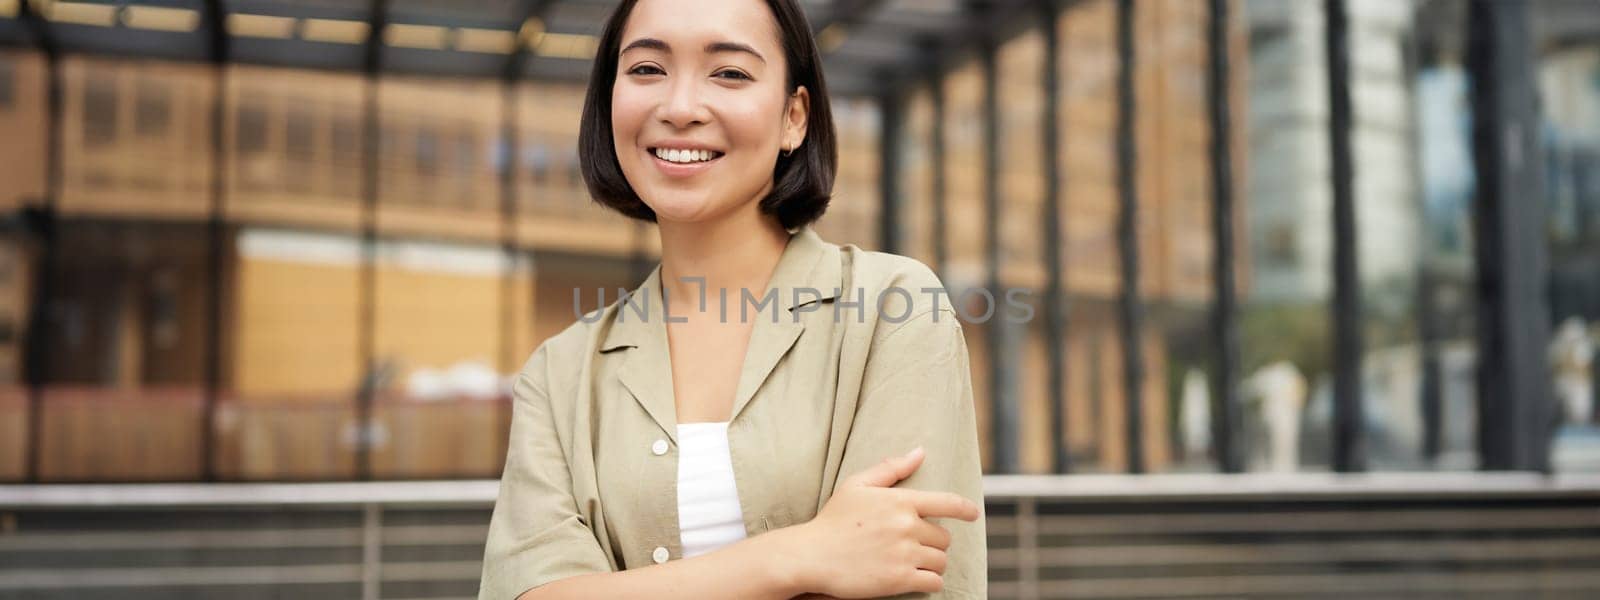 Portrait of young confident female model, girl in casual clothes, posing outside near glass building, smiling at camera.